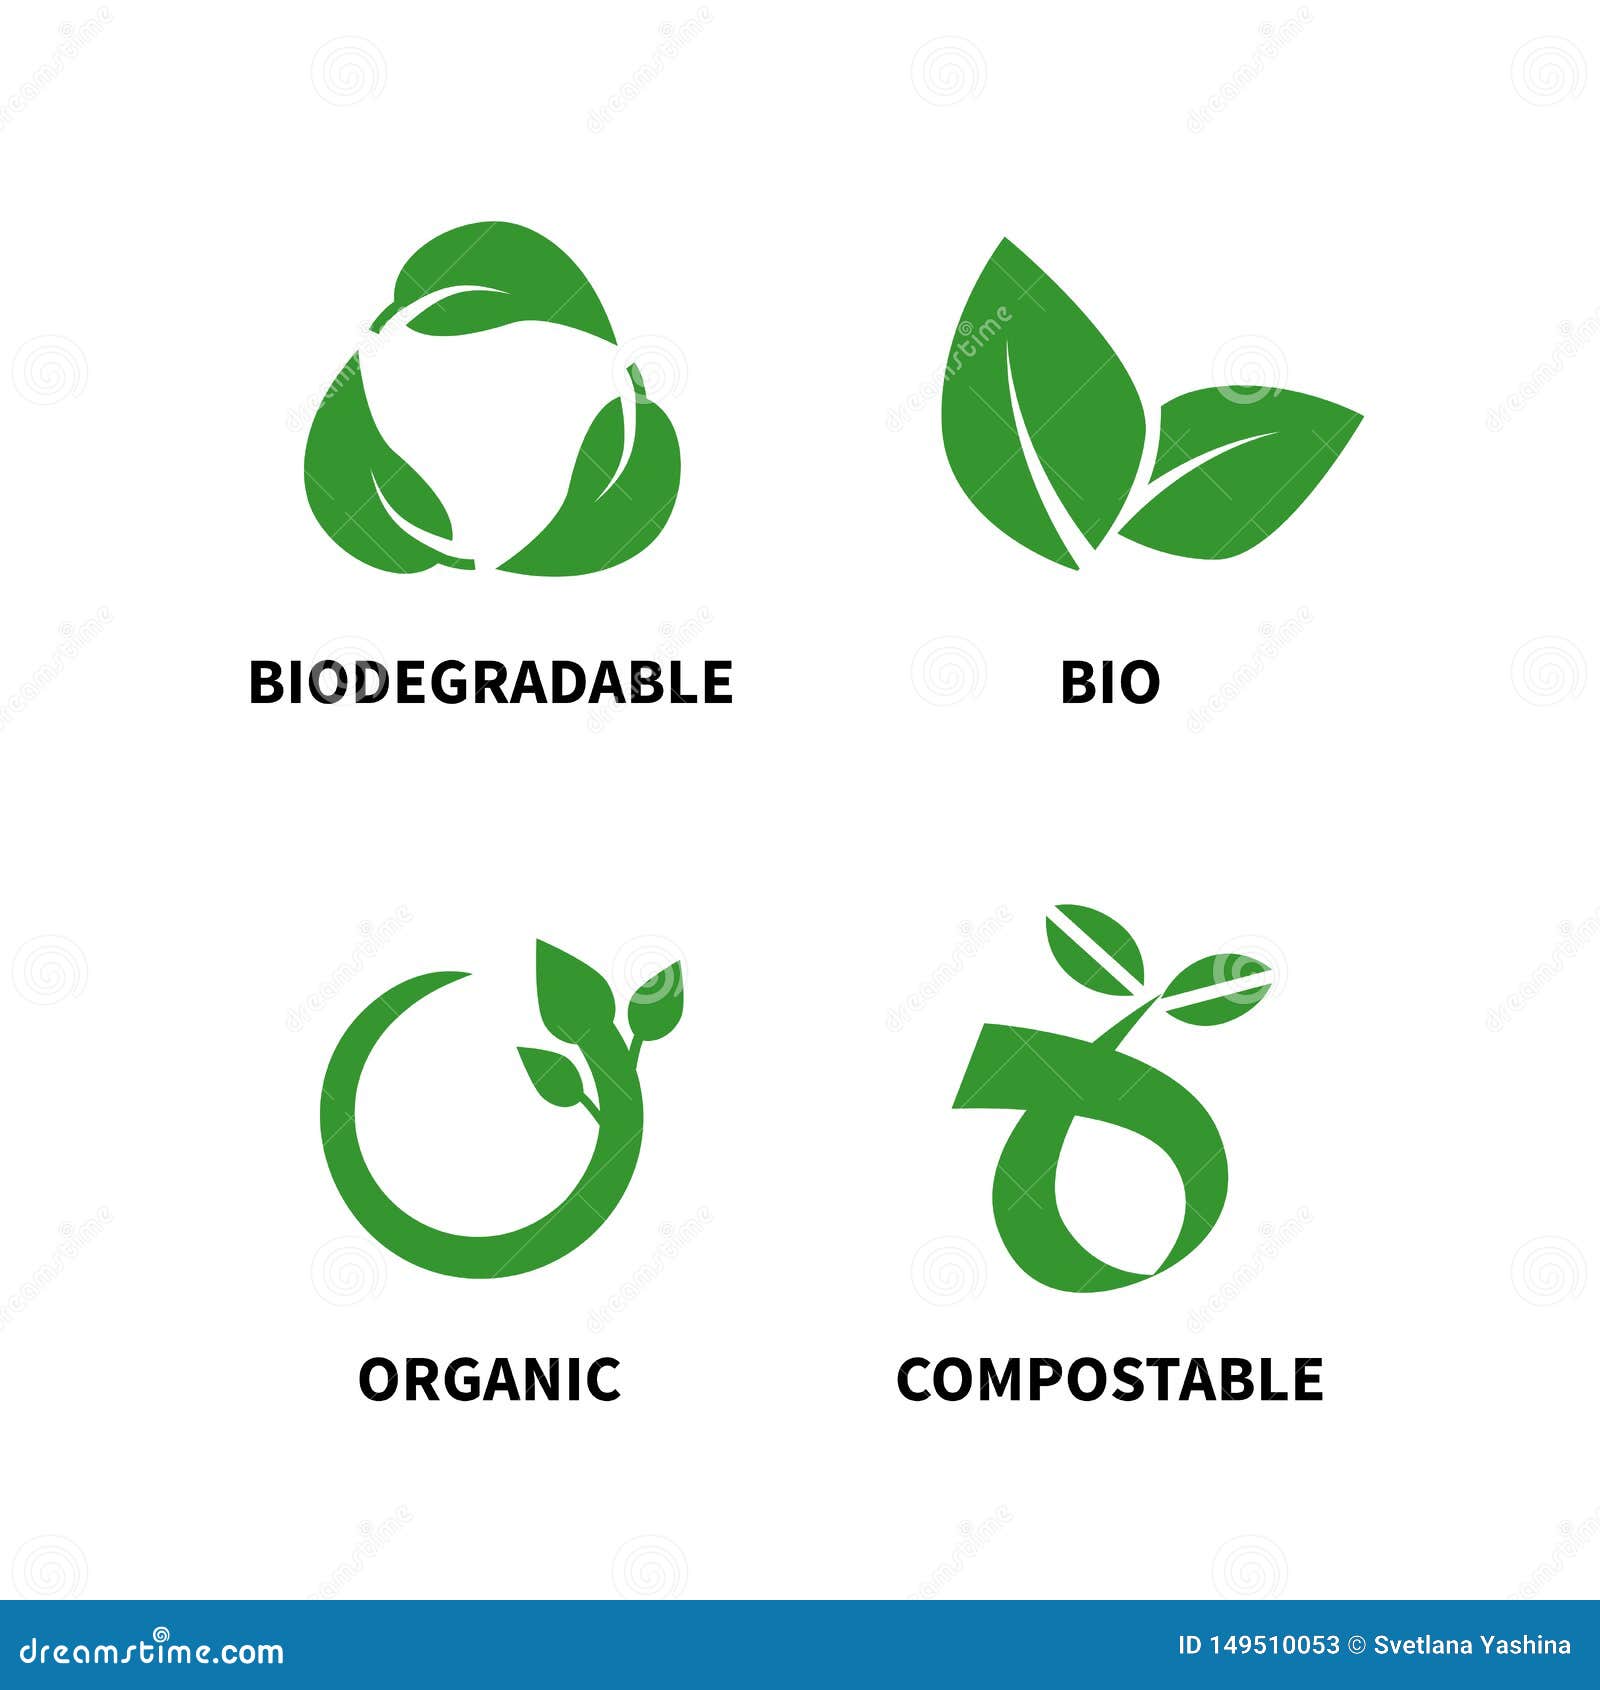 biodegradable and compostable concept reduce reuse recycle  